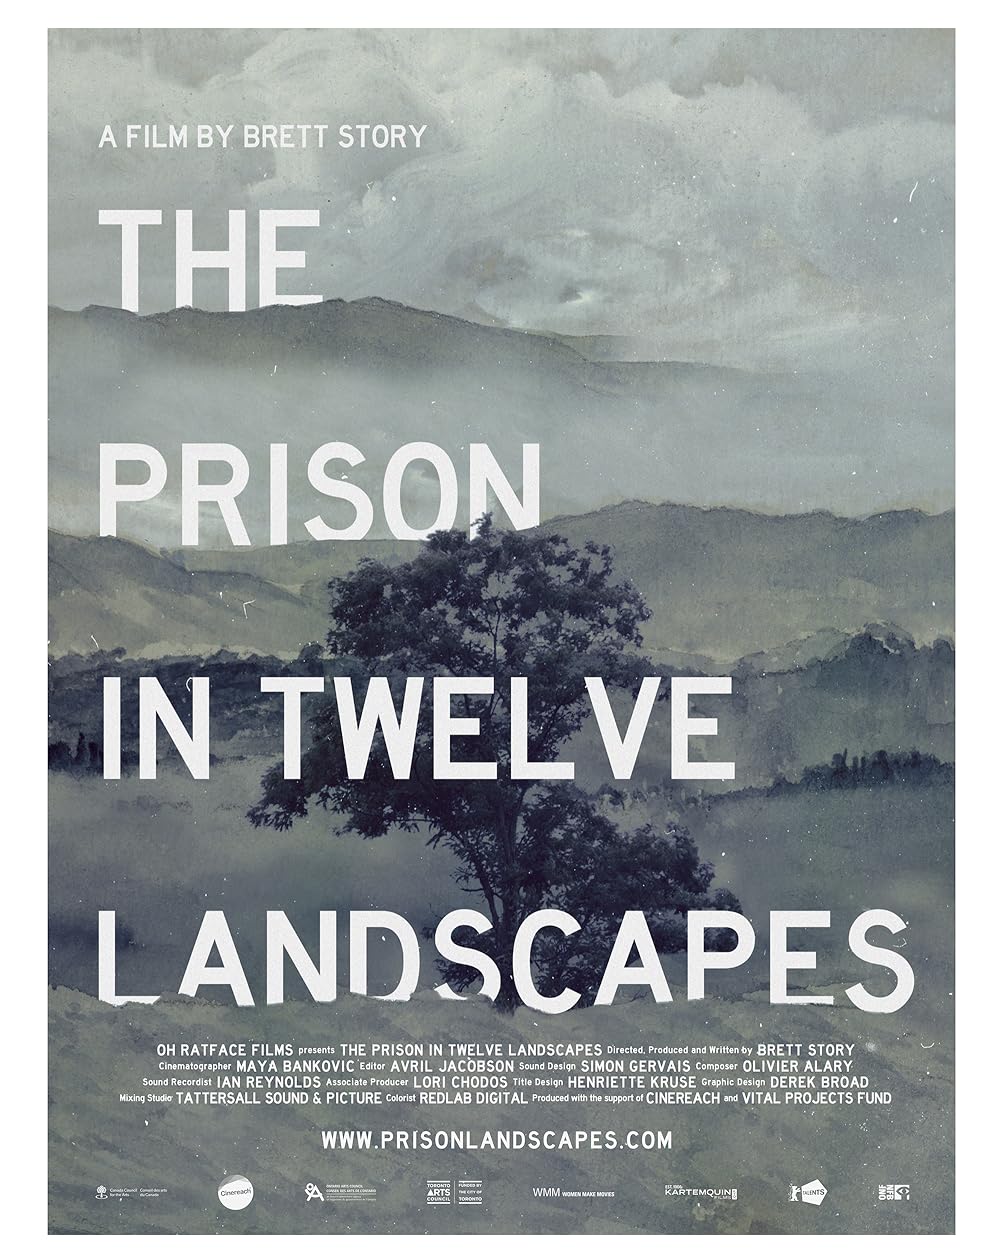 The cover of the film 'The Prison in Twelve Landscapes'